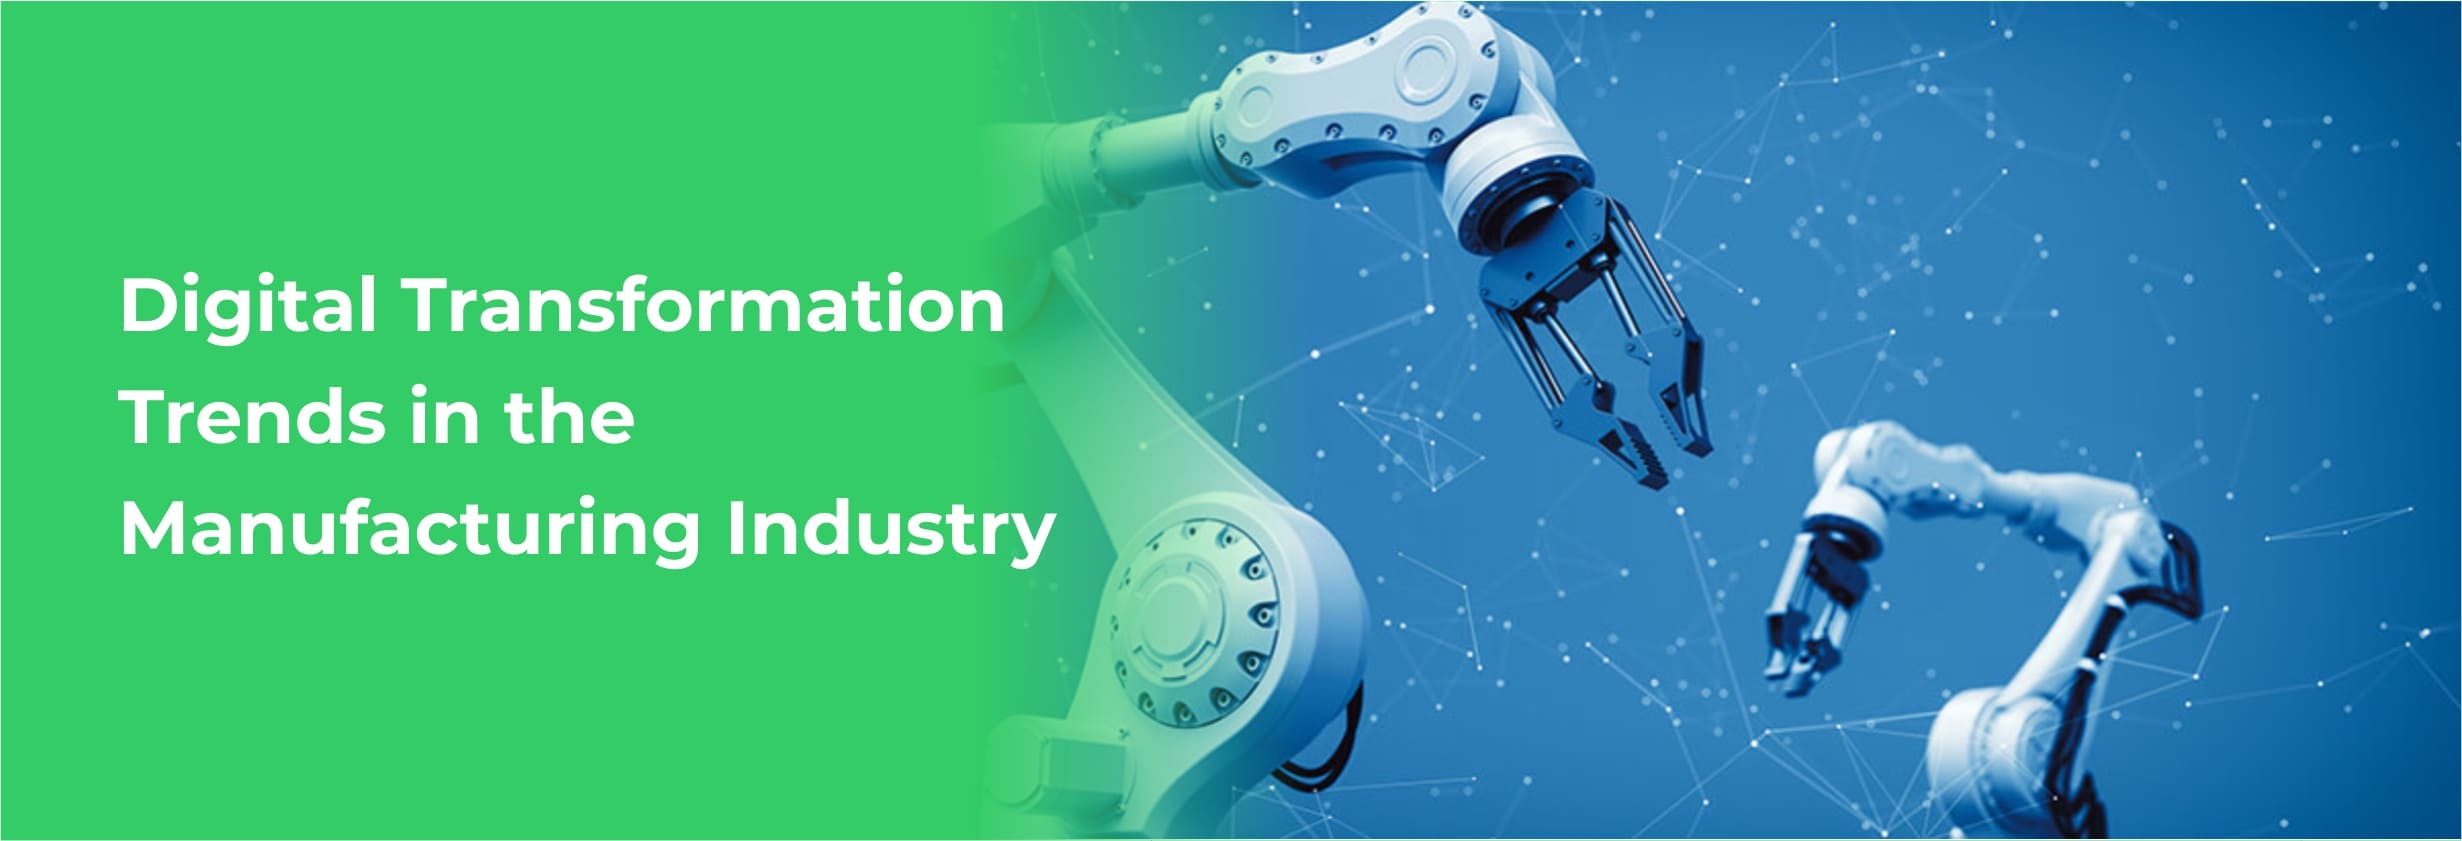 Digital Transformation Trends in the Manufacturing Industry